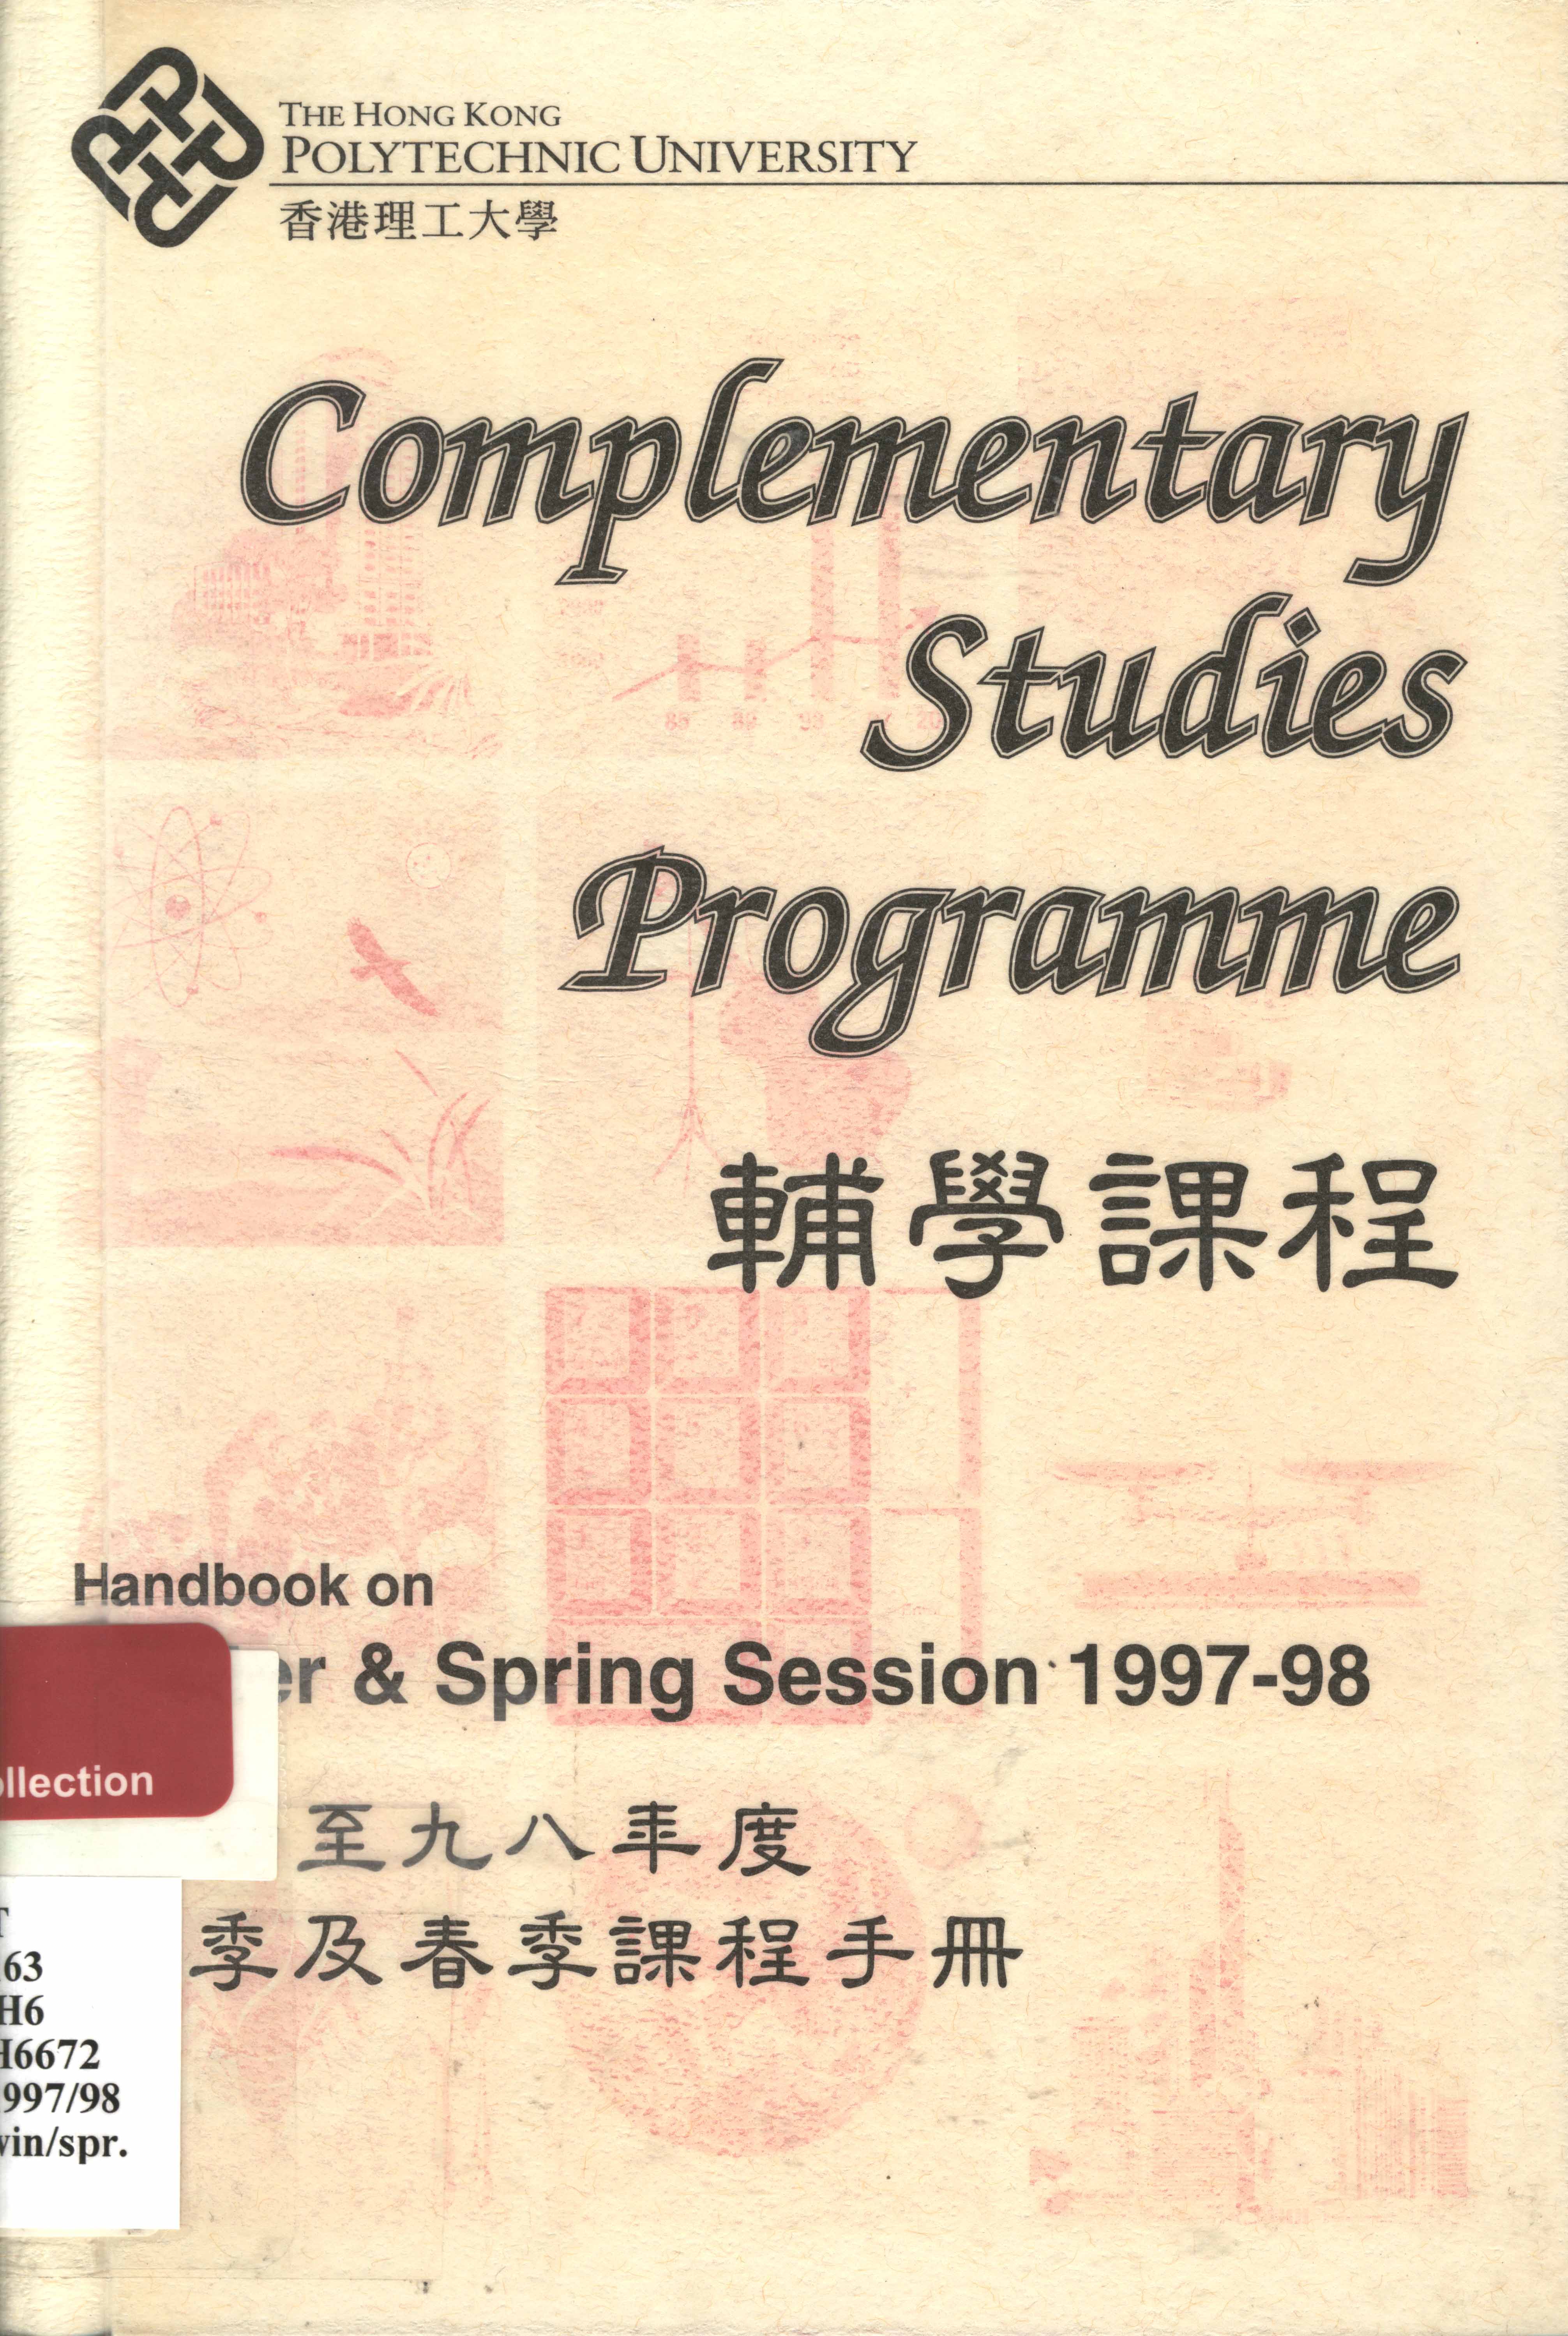 Complementary studies programme handbook on Winter & Spring session 1997-98